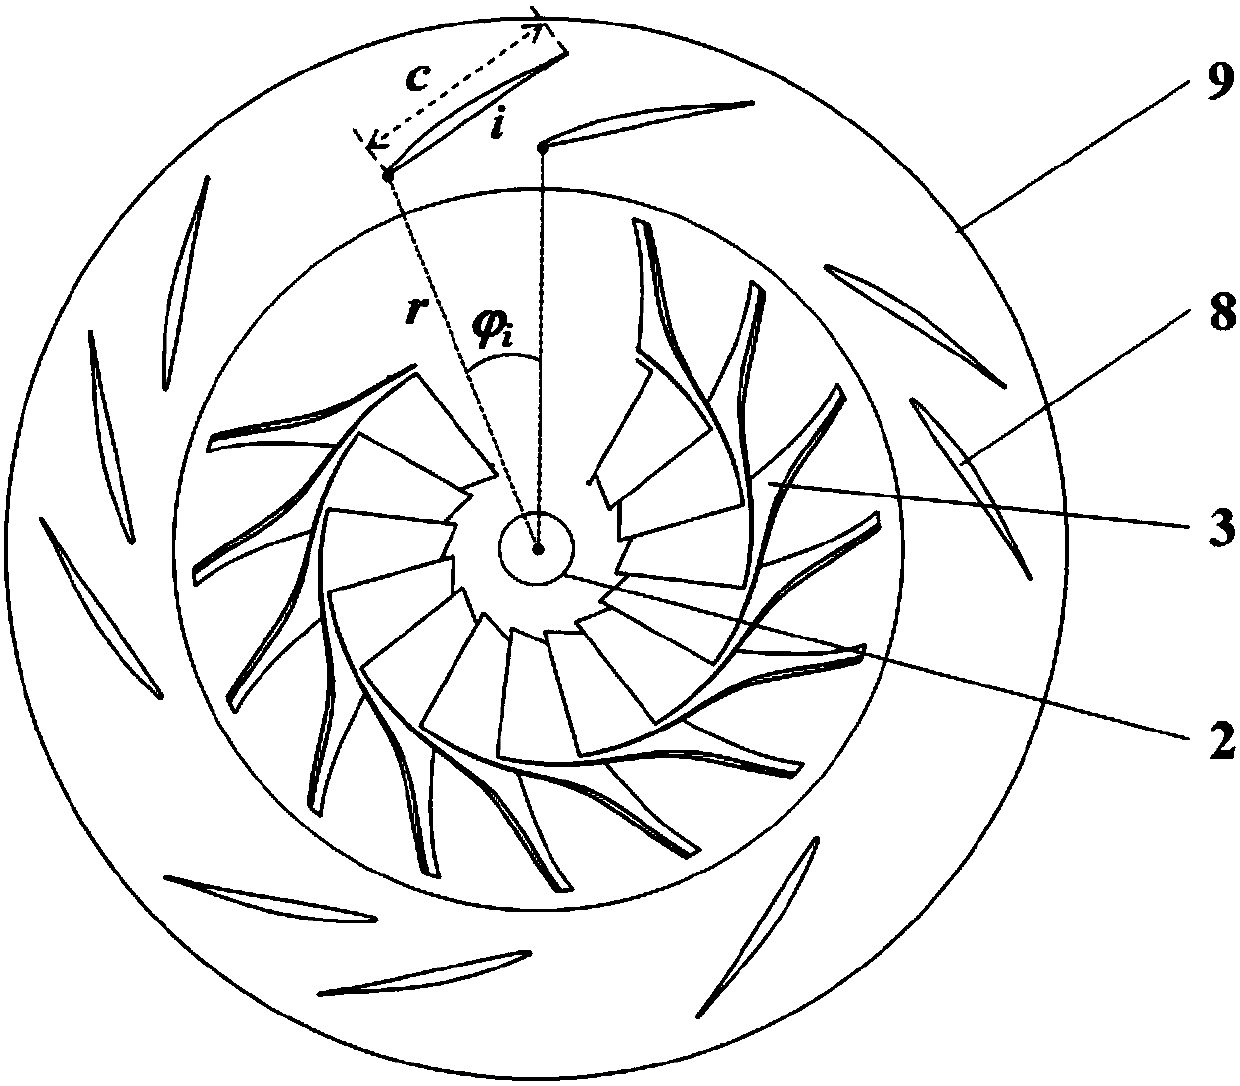 Centrifugal compressor using asymmetrical bladed diffuser with variable blade consistencies in circumferential direction